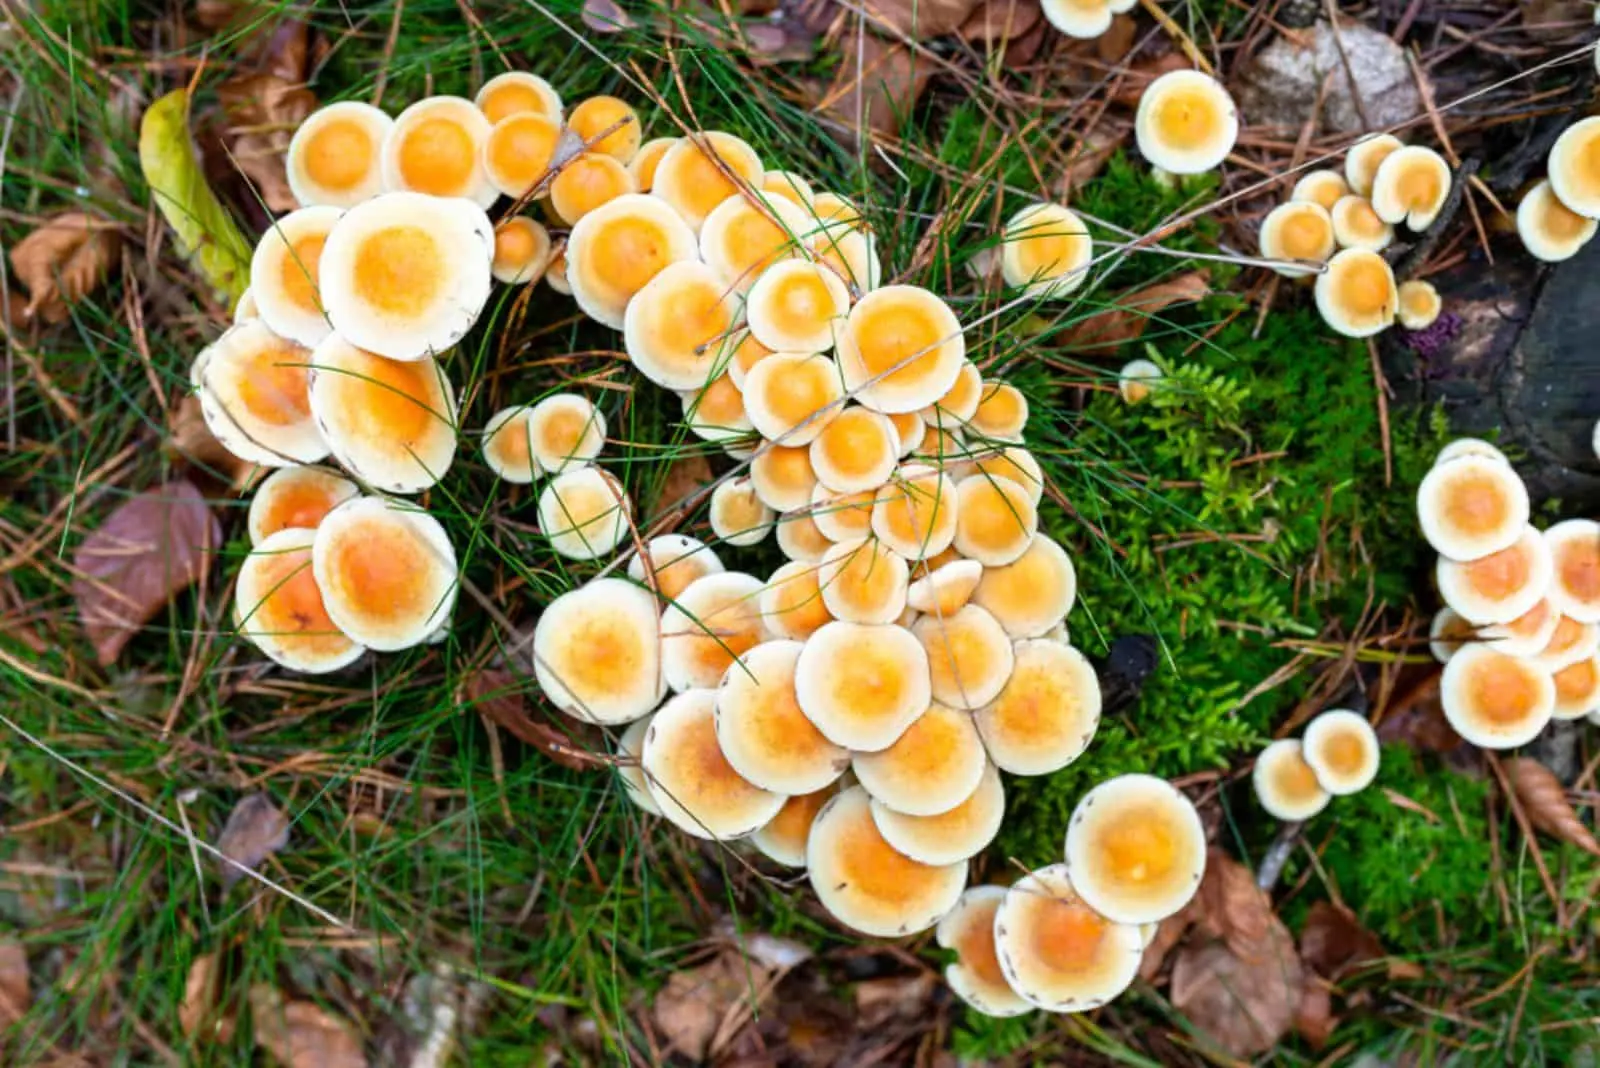 yellow fungus on mulch in forest